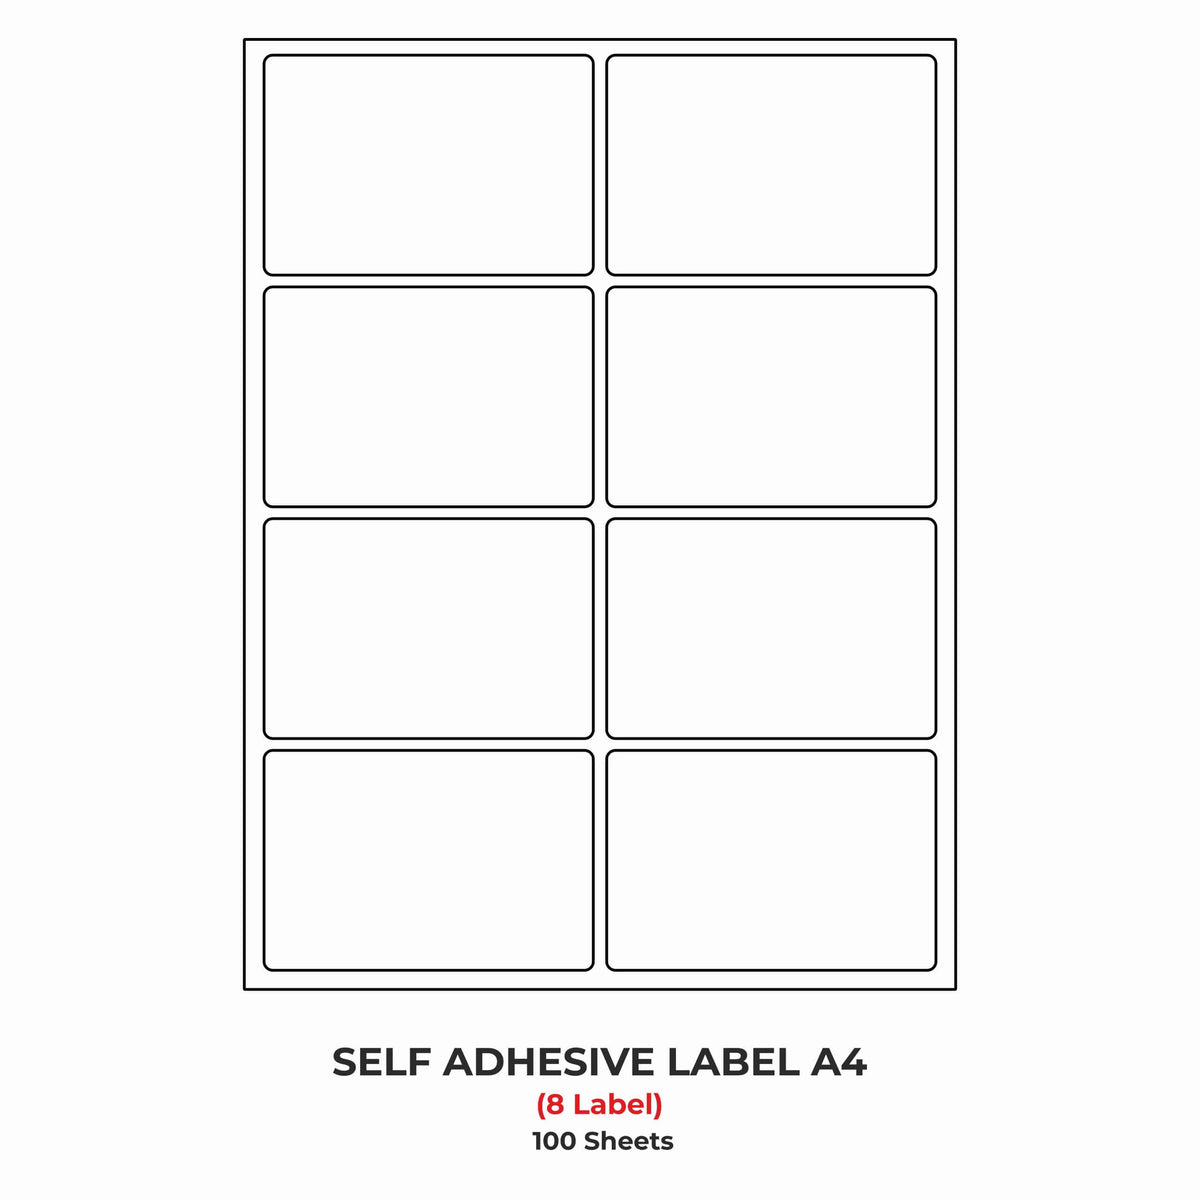 A4 (ST8) Packaging Label (100mm x 68mm x 8) (Self Adhesive Label for Inkjet/Copier/Laser Printer)